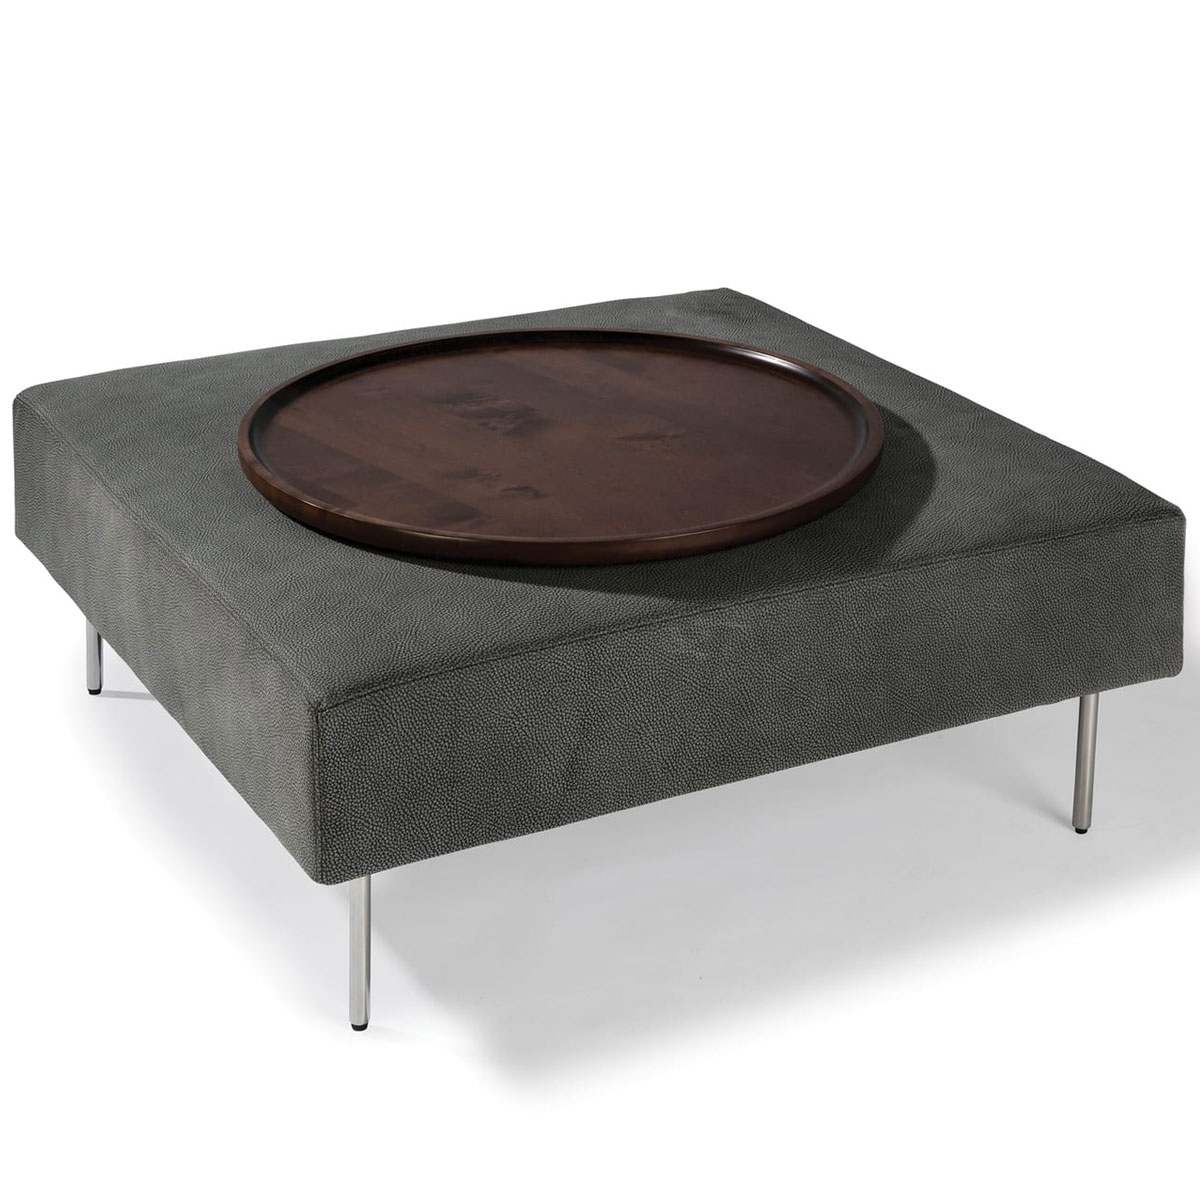 Thayer Coggin 1431-009 Slice Square Ottoman with 1431-08 Large Round Table Tray 